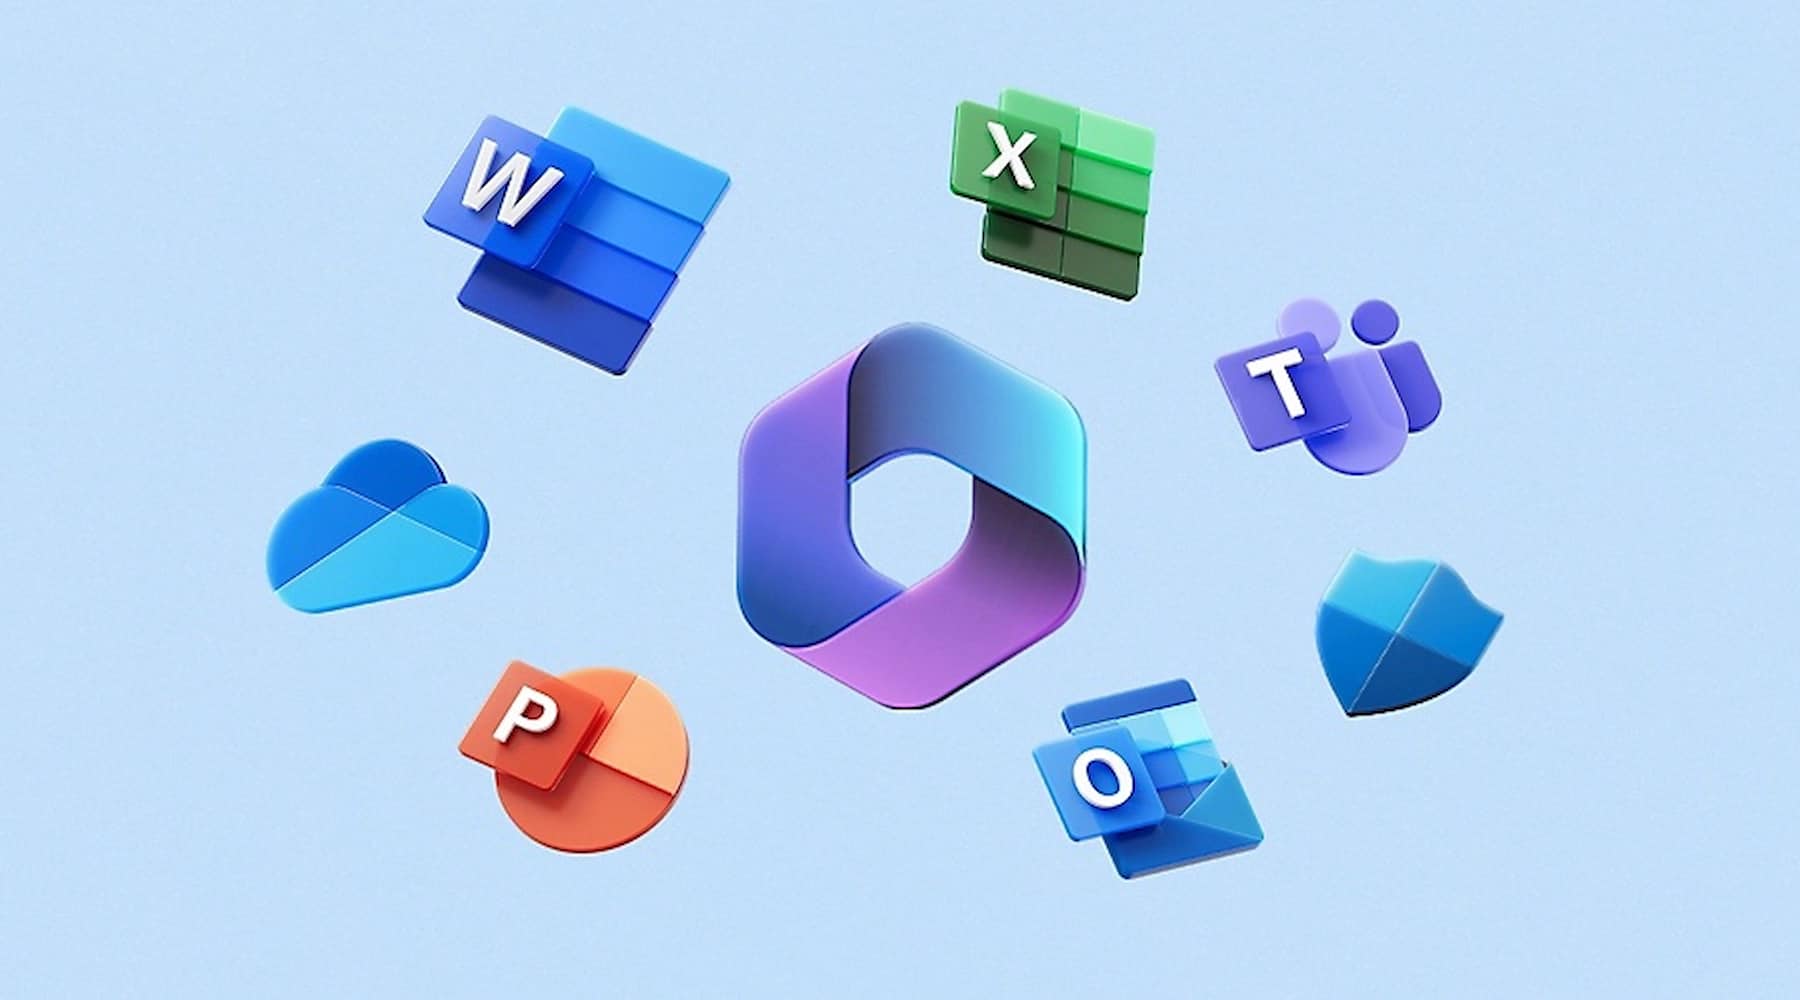 Microsoft office suite icons